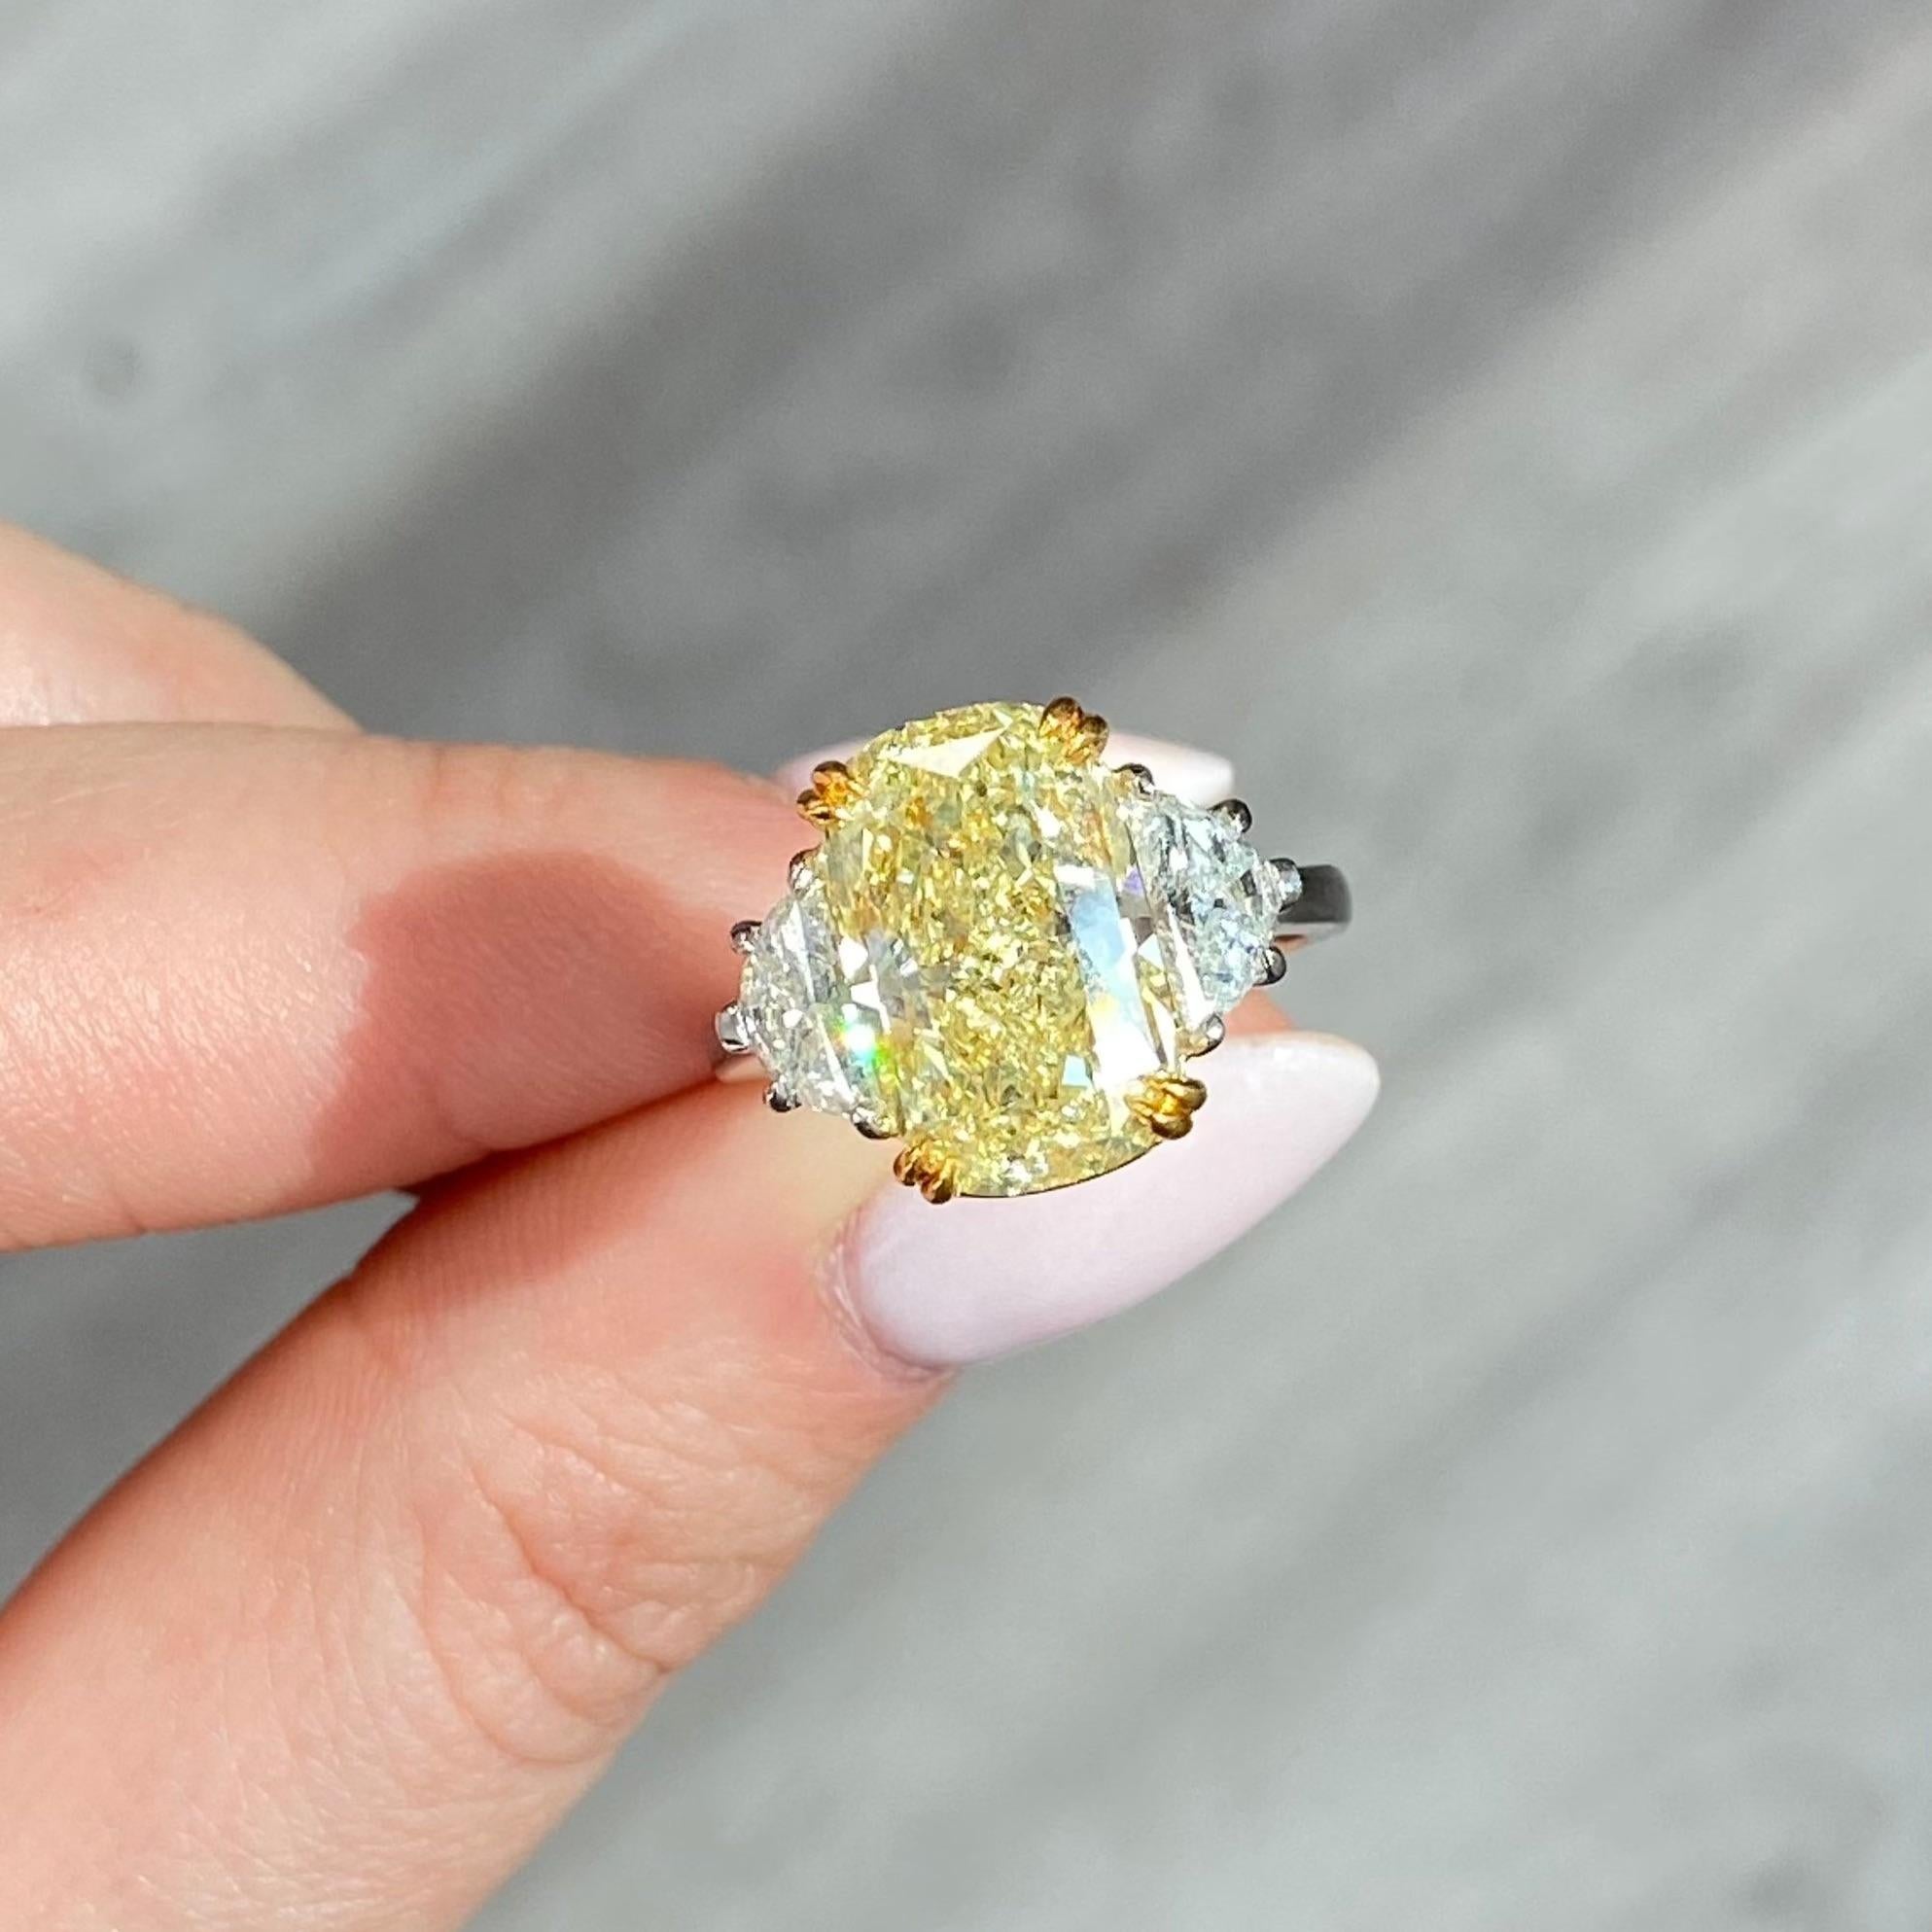 5.52 Carat Fancy Yellow
Elongated Cushion Cut 
Internally Flawless Clarity
Excellent and Very Good Cutting
Faint Fluorescence
0.91 Carats of Side Half Moons
Crafted in Platinum & 18k Yellow Gold
GIA Certified Diamond
Handmade in NYC

This piece can